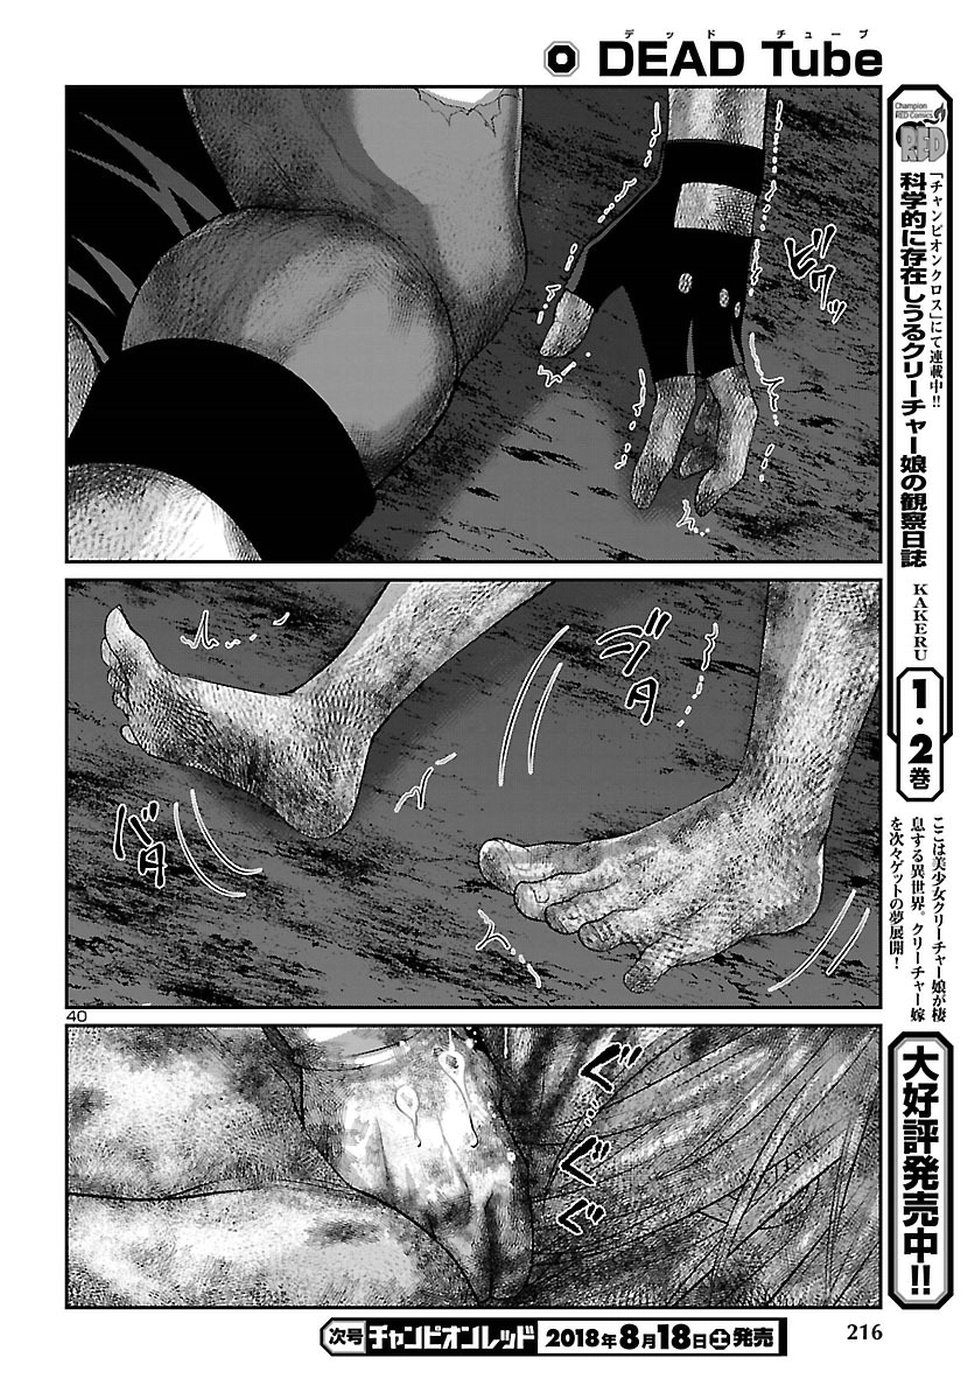 DEAD Tube Vol. 10 Ch. 43 The Last Justice Execution